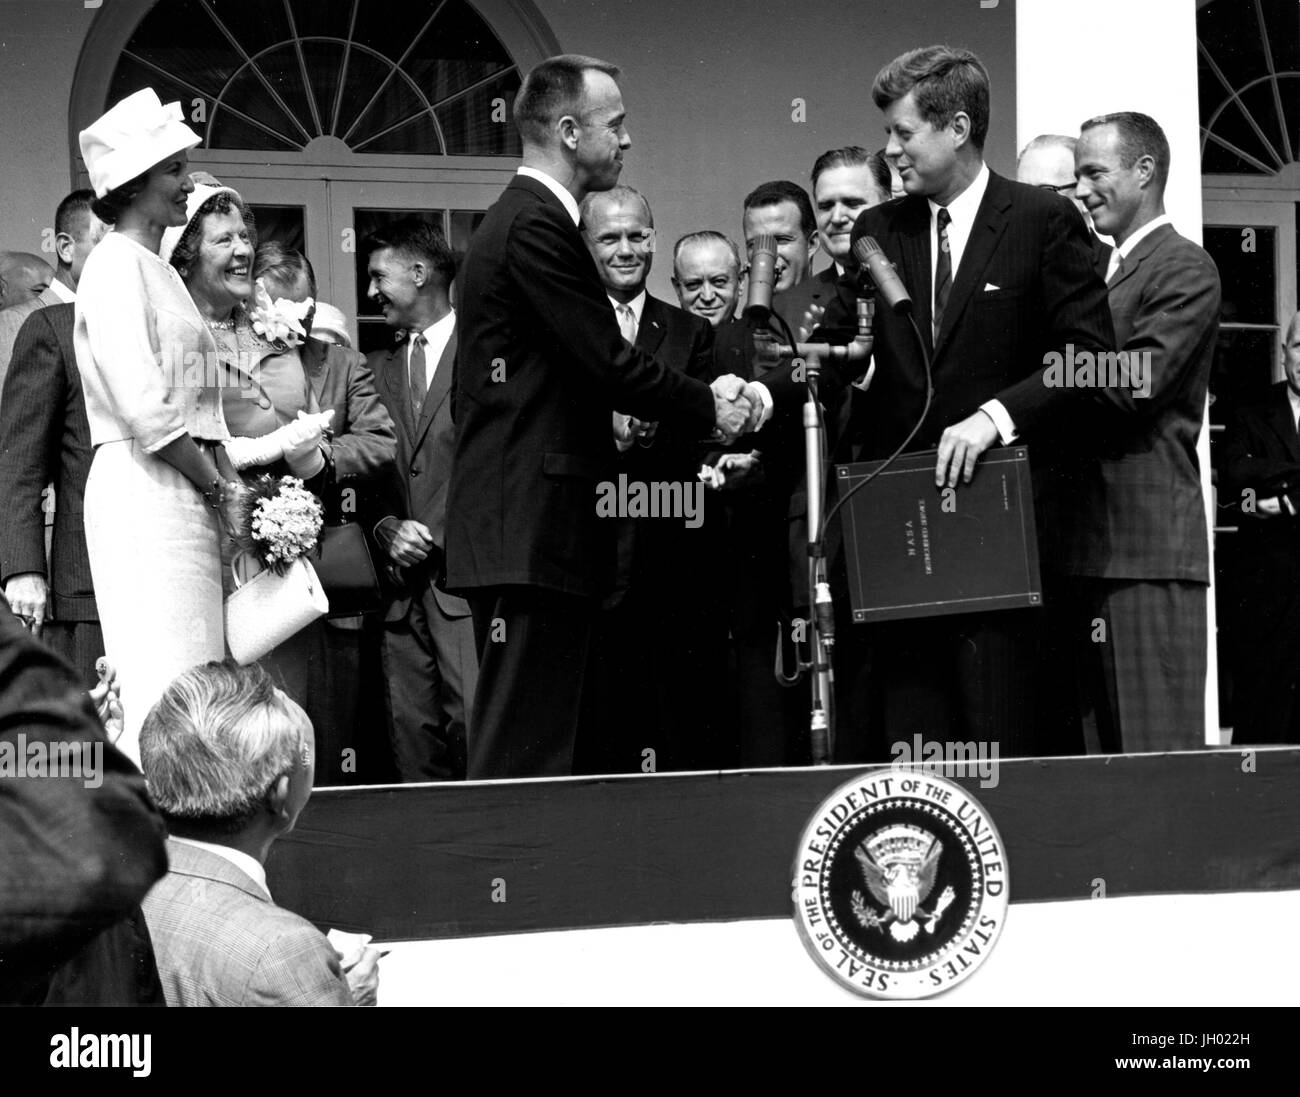 President John F. Kennedy congratulates astronaut Alan B. Shepard, Jr., the first American in space, on his historic May 5th, 1961 ride in the Freedom 7 spacecraft and presents him with the NASA Distinguished Service Award. The ceremony took place on the White House lawn. Shepard's wife, Louise (left in white dress and hat), and his mother were in attendance as well as the other six Mercury astronauts and NASA officals, some visible in the background. NASA Photo Stock Photo